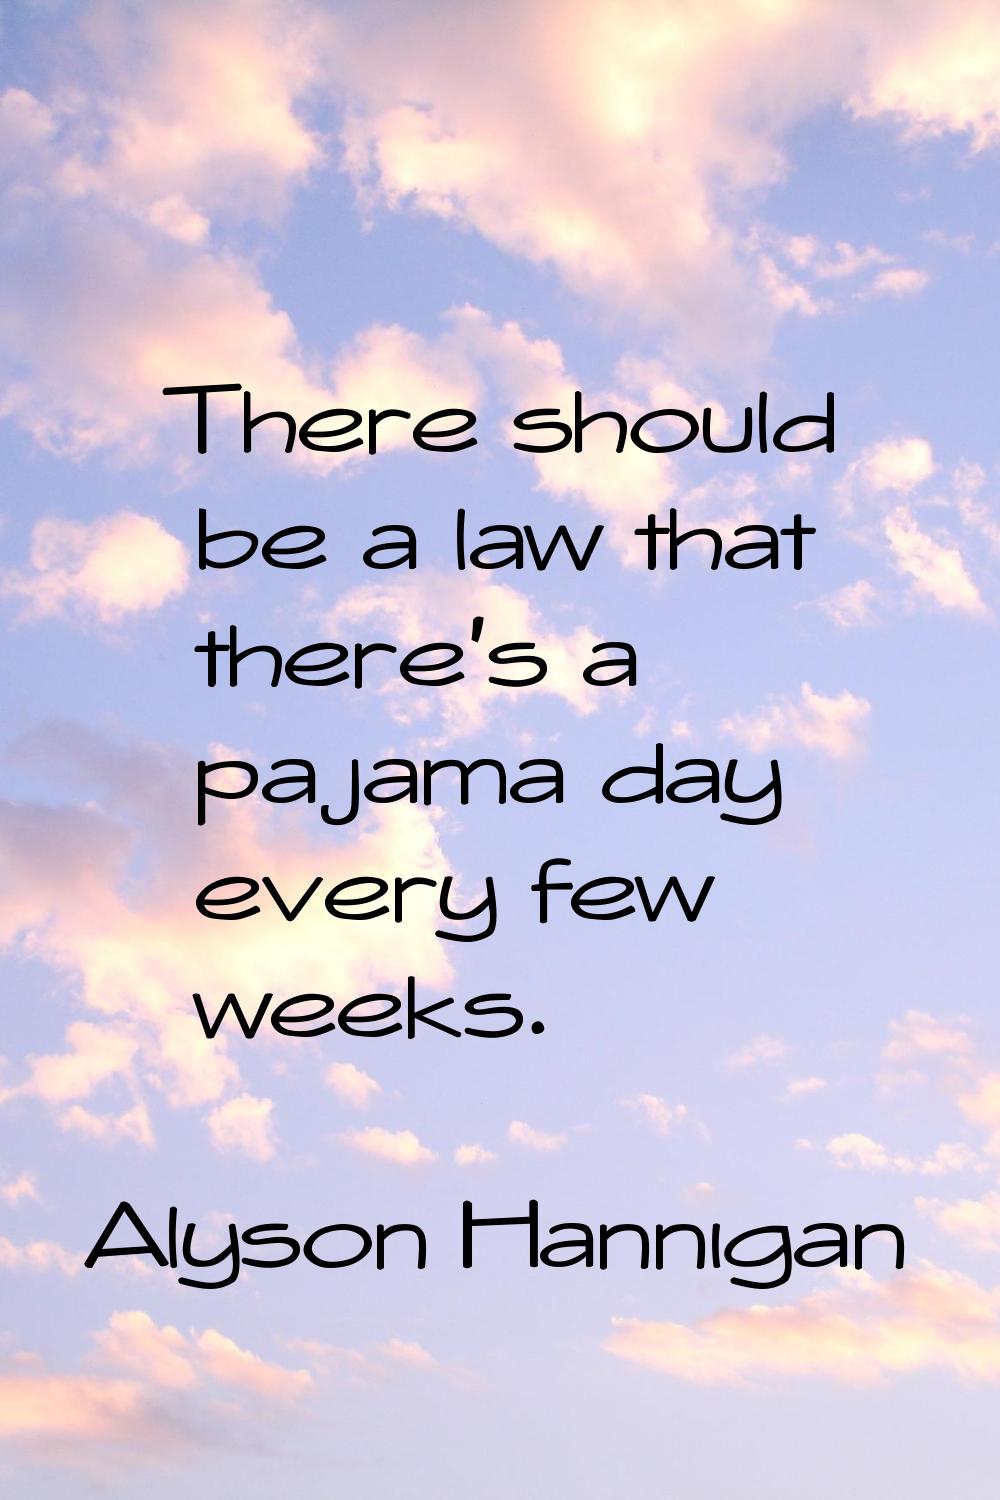 There should be a law that there's a pajama day every few weeks.